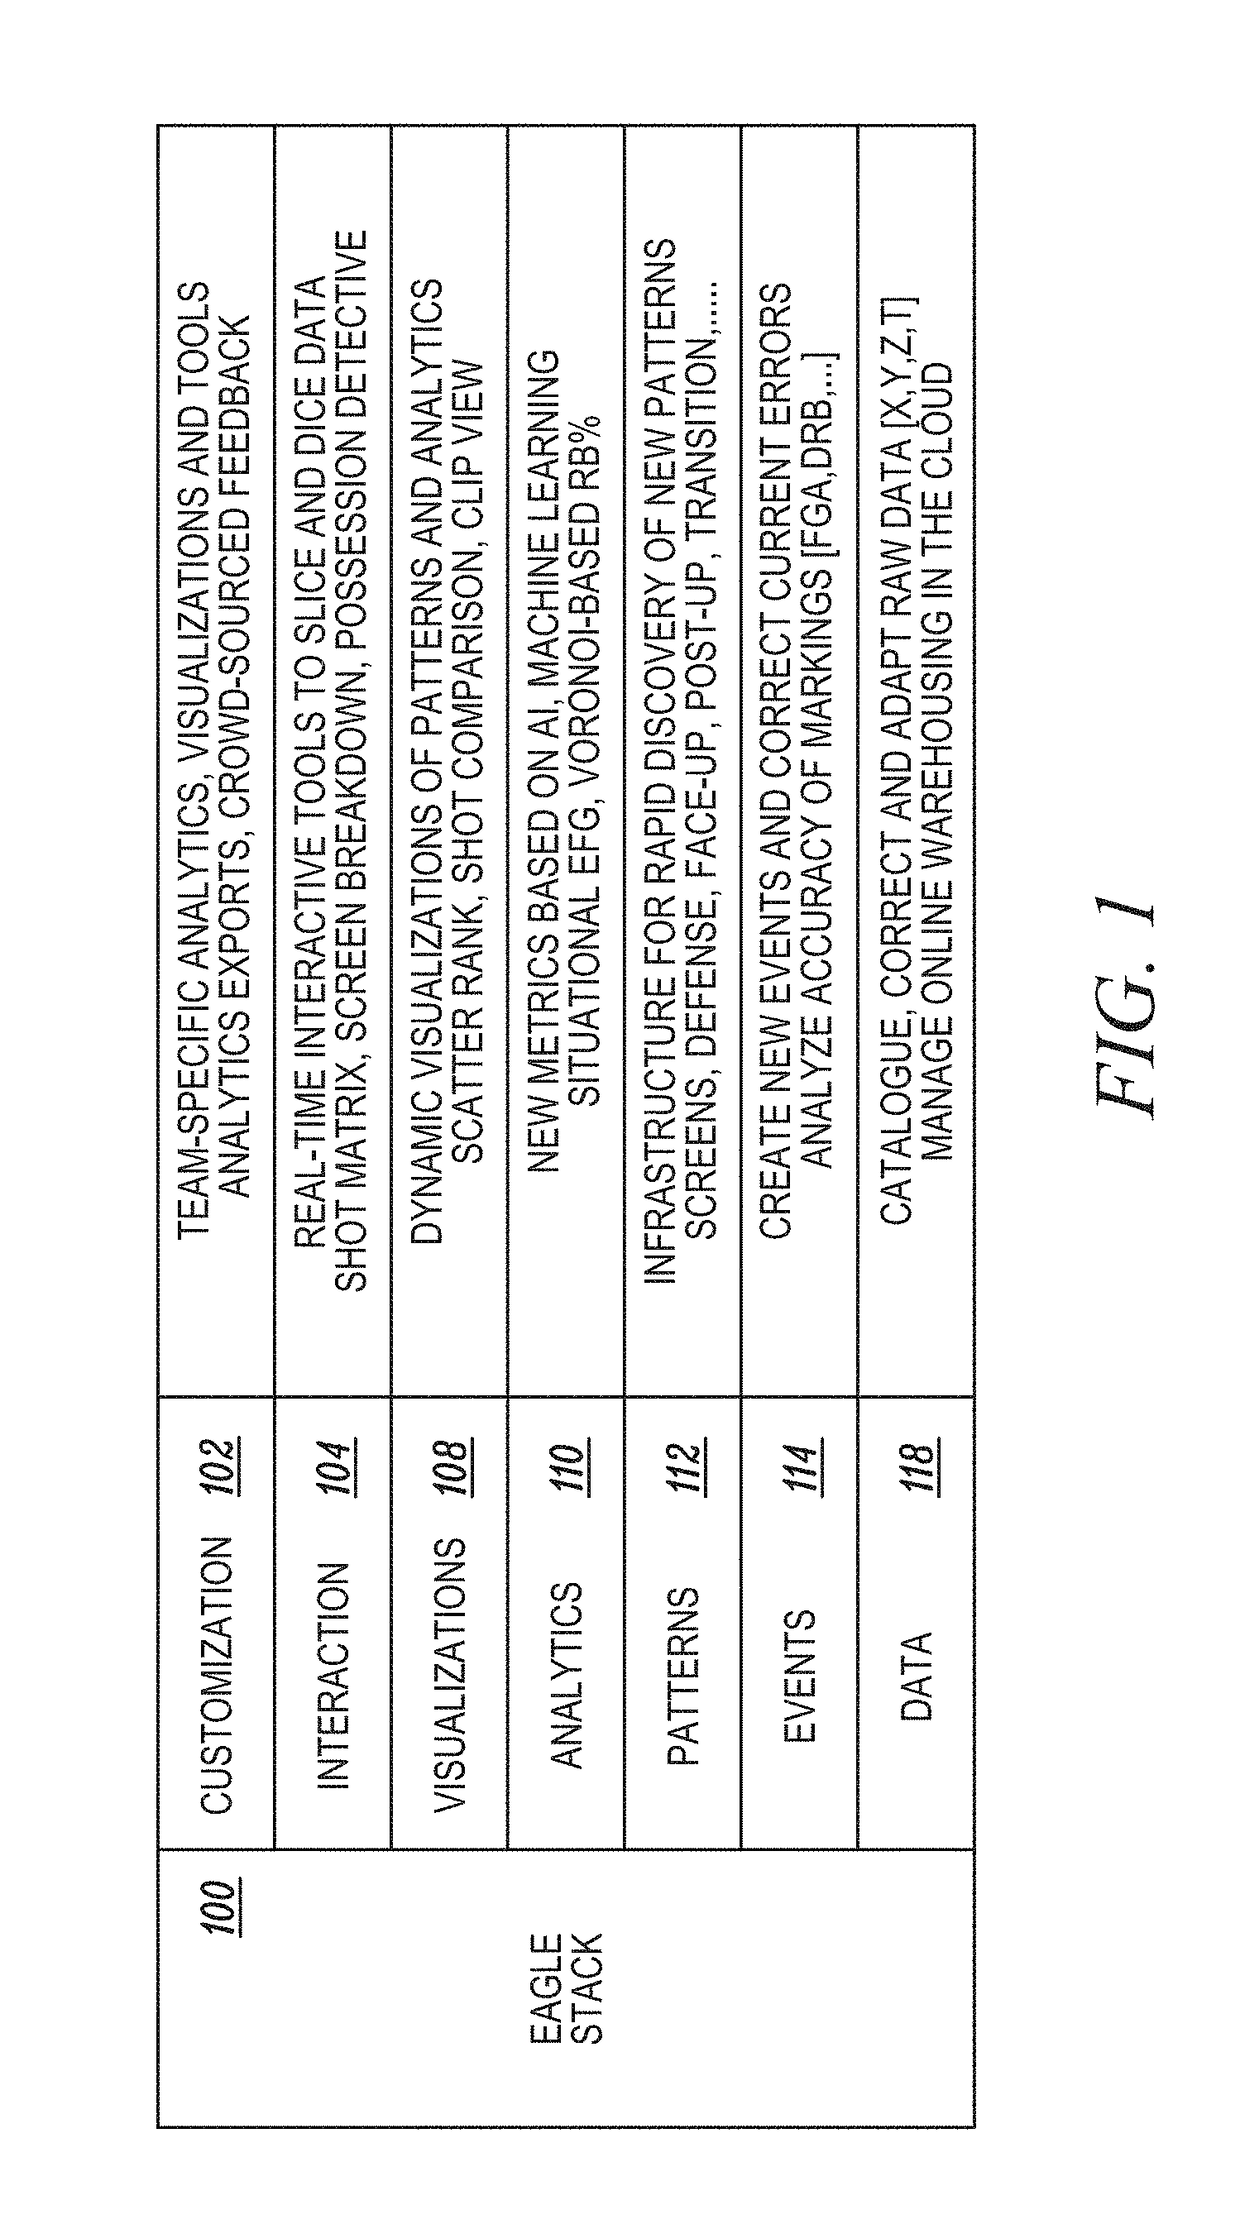 Methods and systems of spatiotemporal pattern recognition for video content development